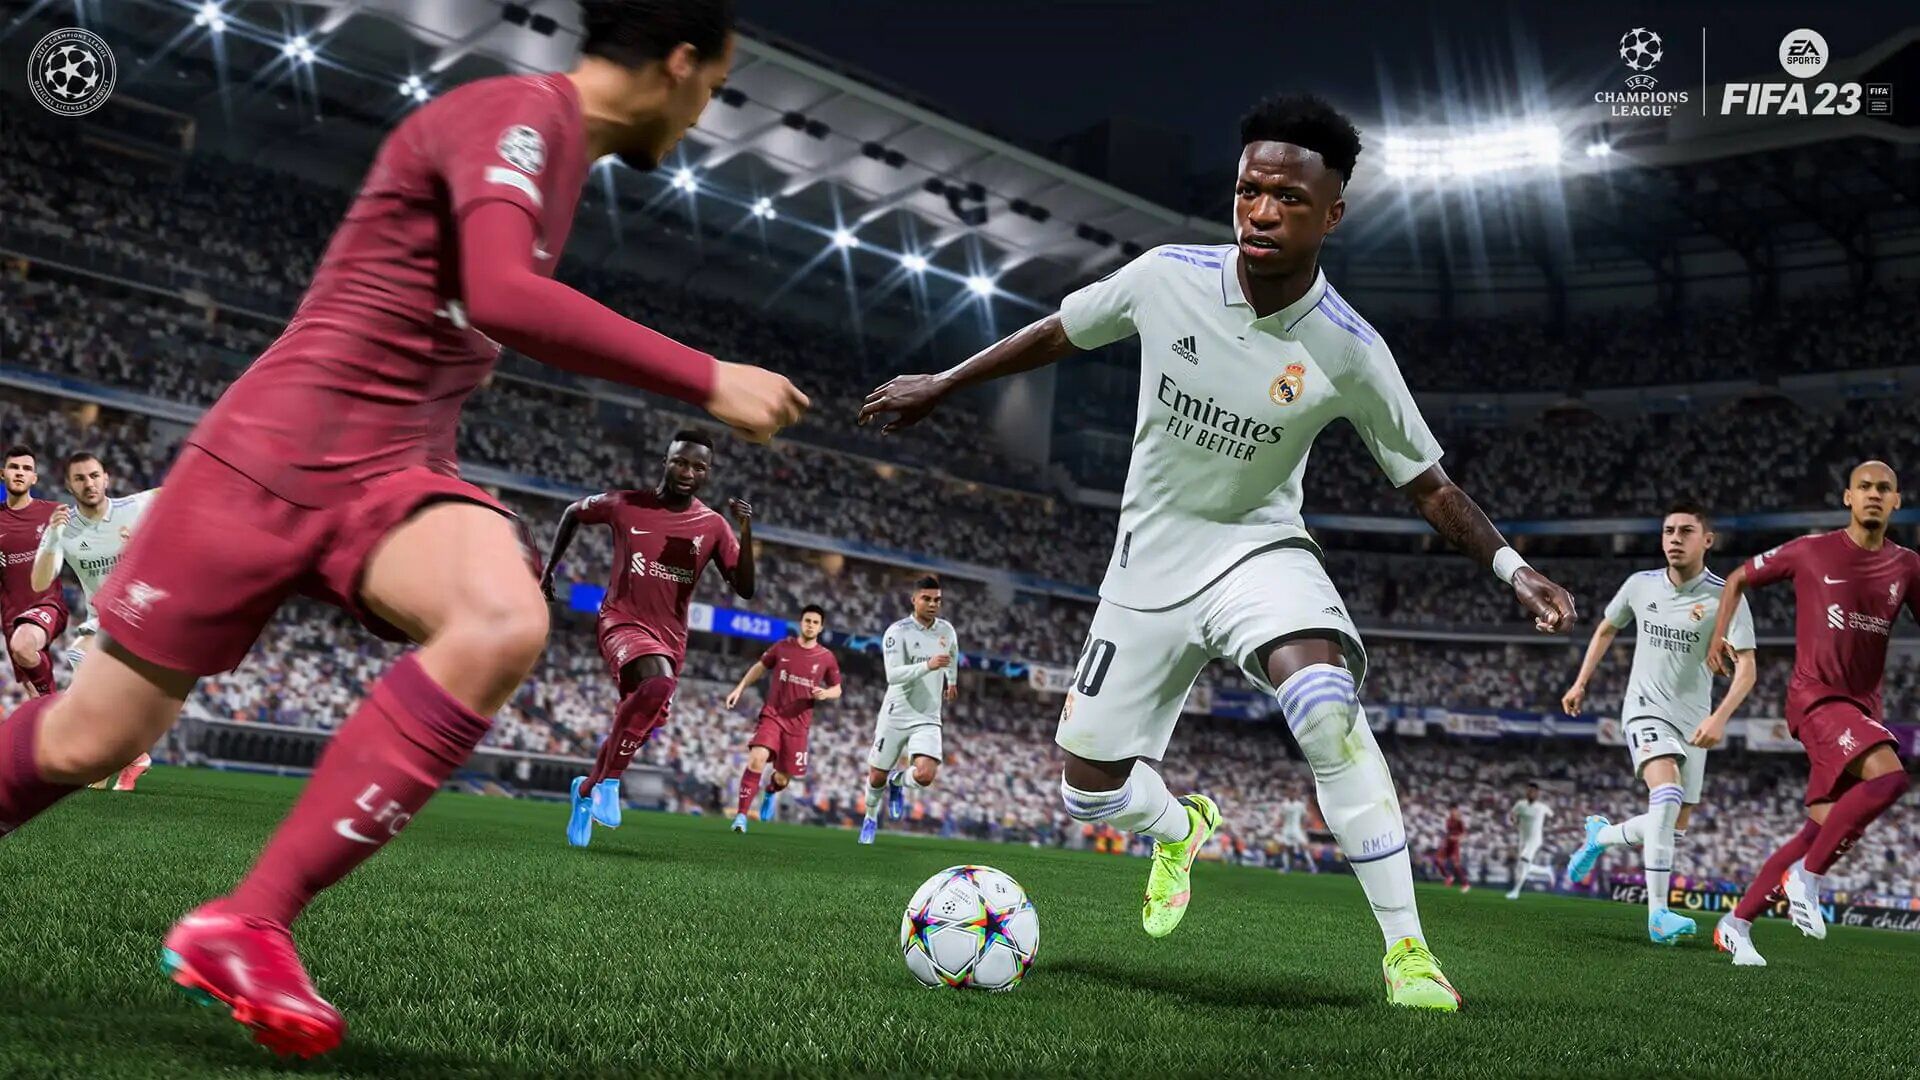 RTTK FIFA 23 / FUT 23 : Road To The Knockout, prix, cartes, joueurs, guide complet